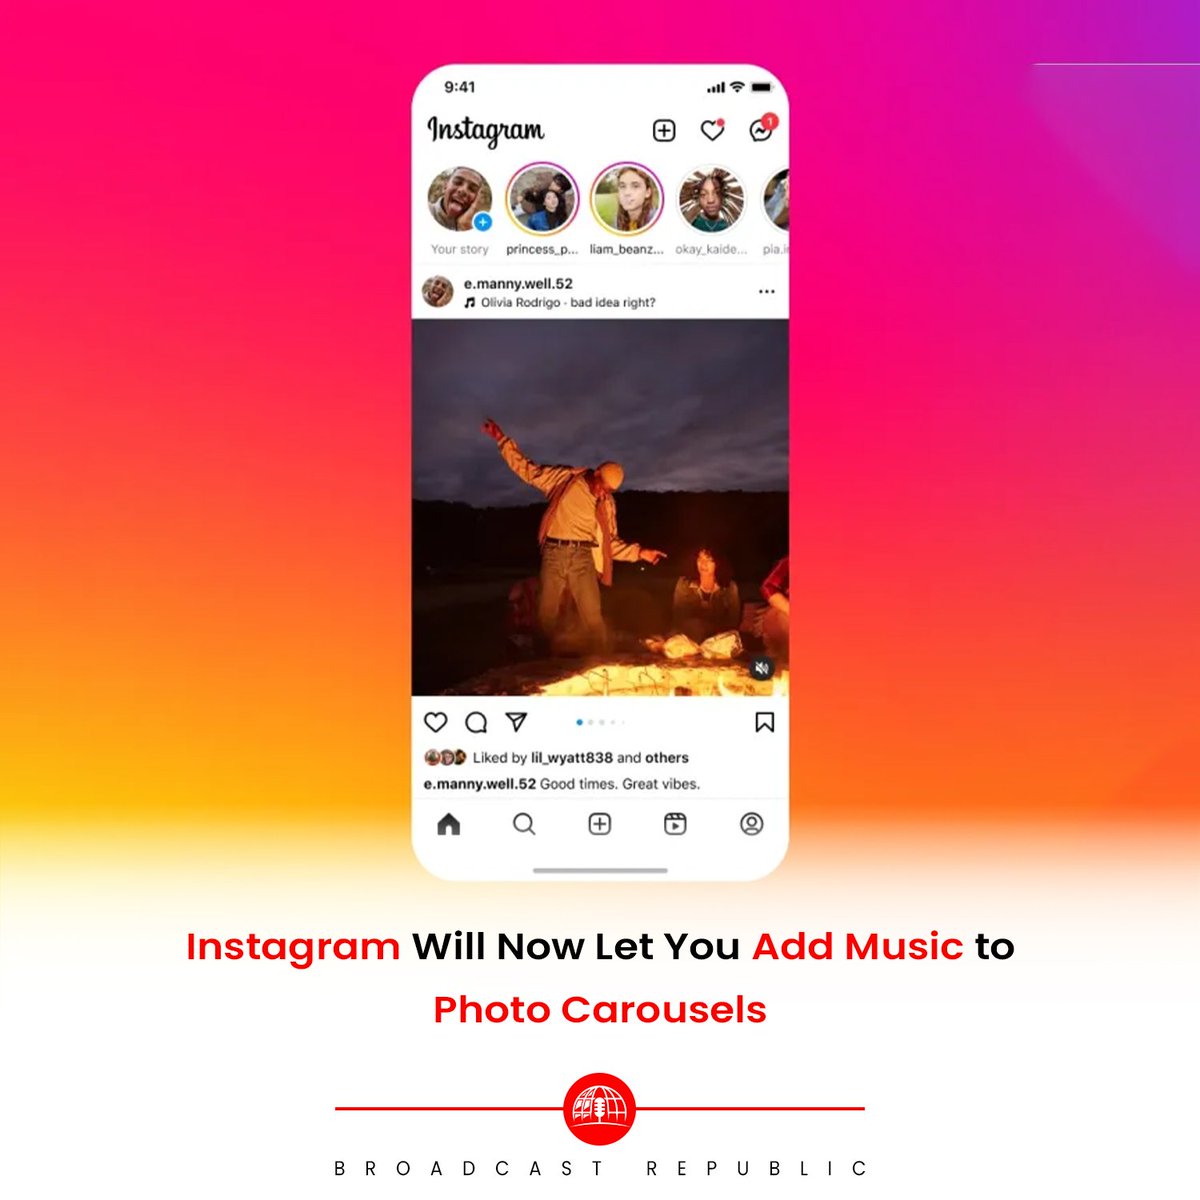 Instagram is introducing exciting new features that enhance user creativity and collaboration. Users can now add music to their photo carousels, allowing them to showcase their musical preferences. 

#BroadcastRepublic #InstagramFeatures #MusicInCarousels #CollaborativeContent